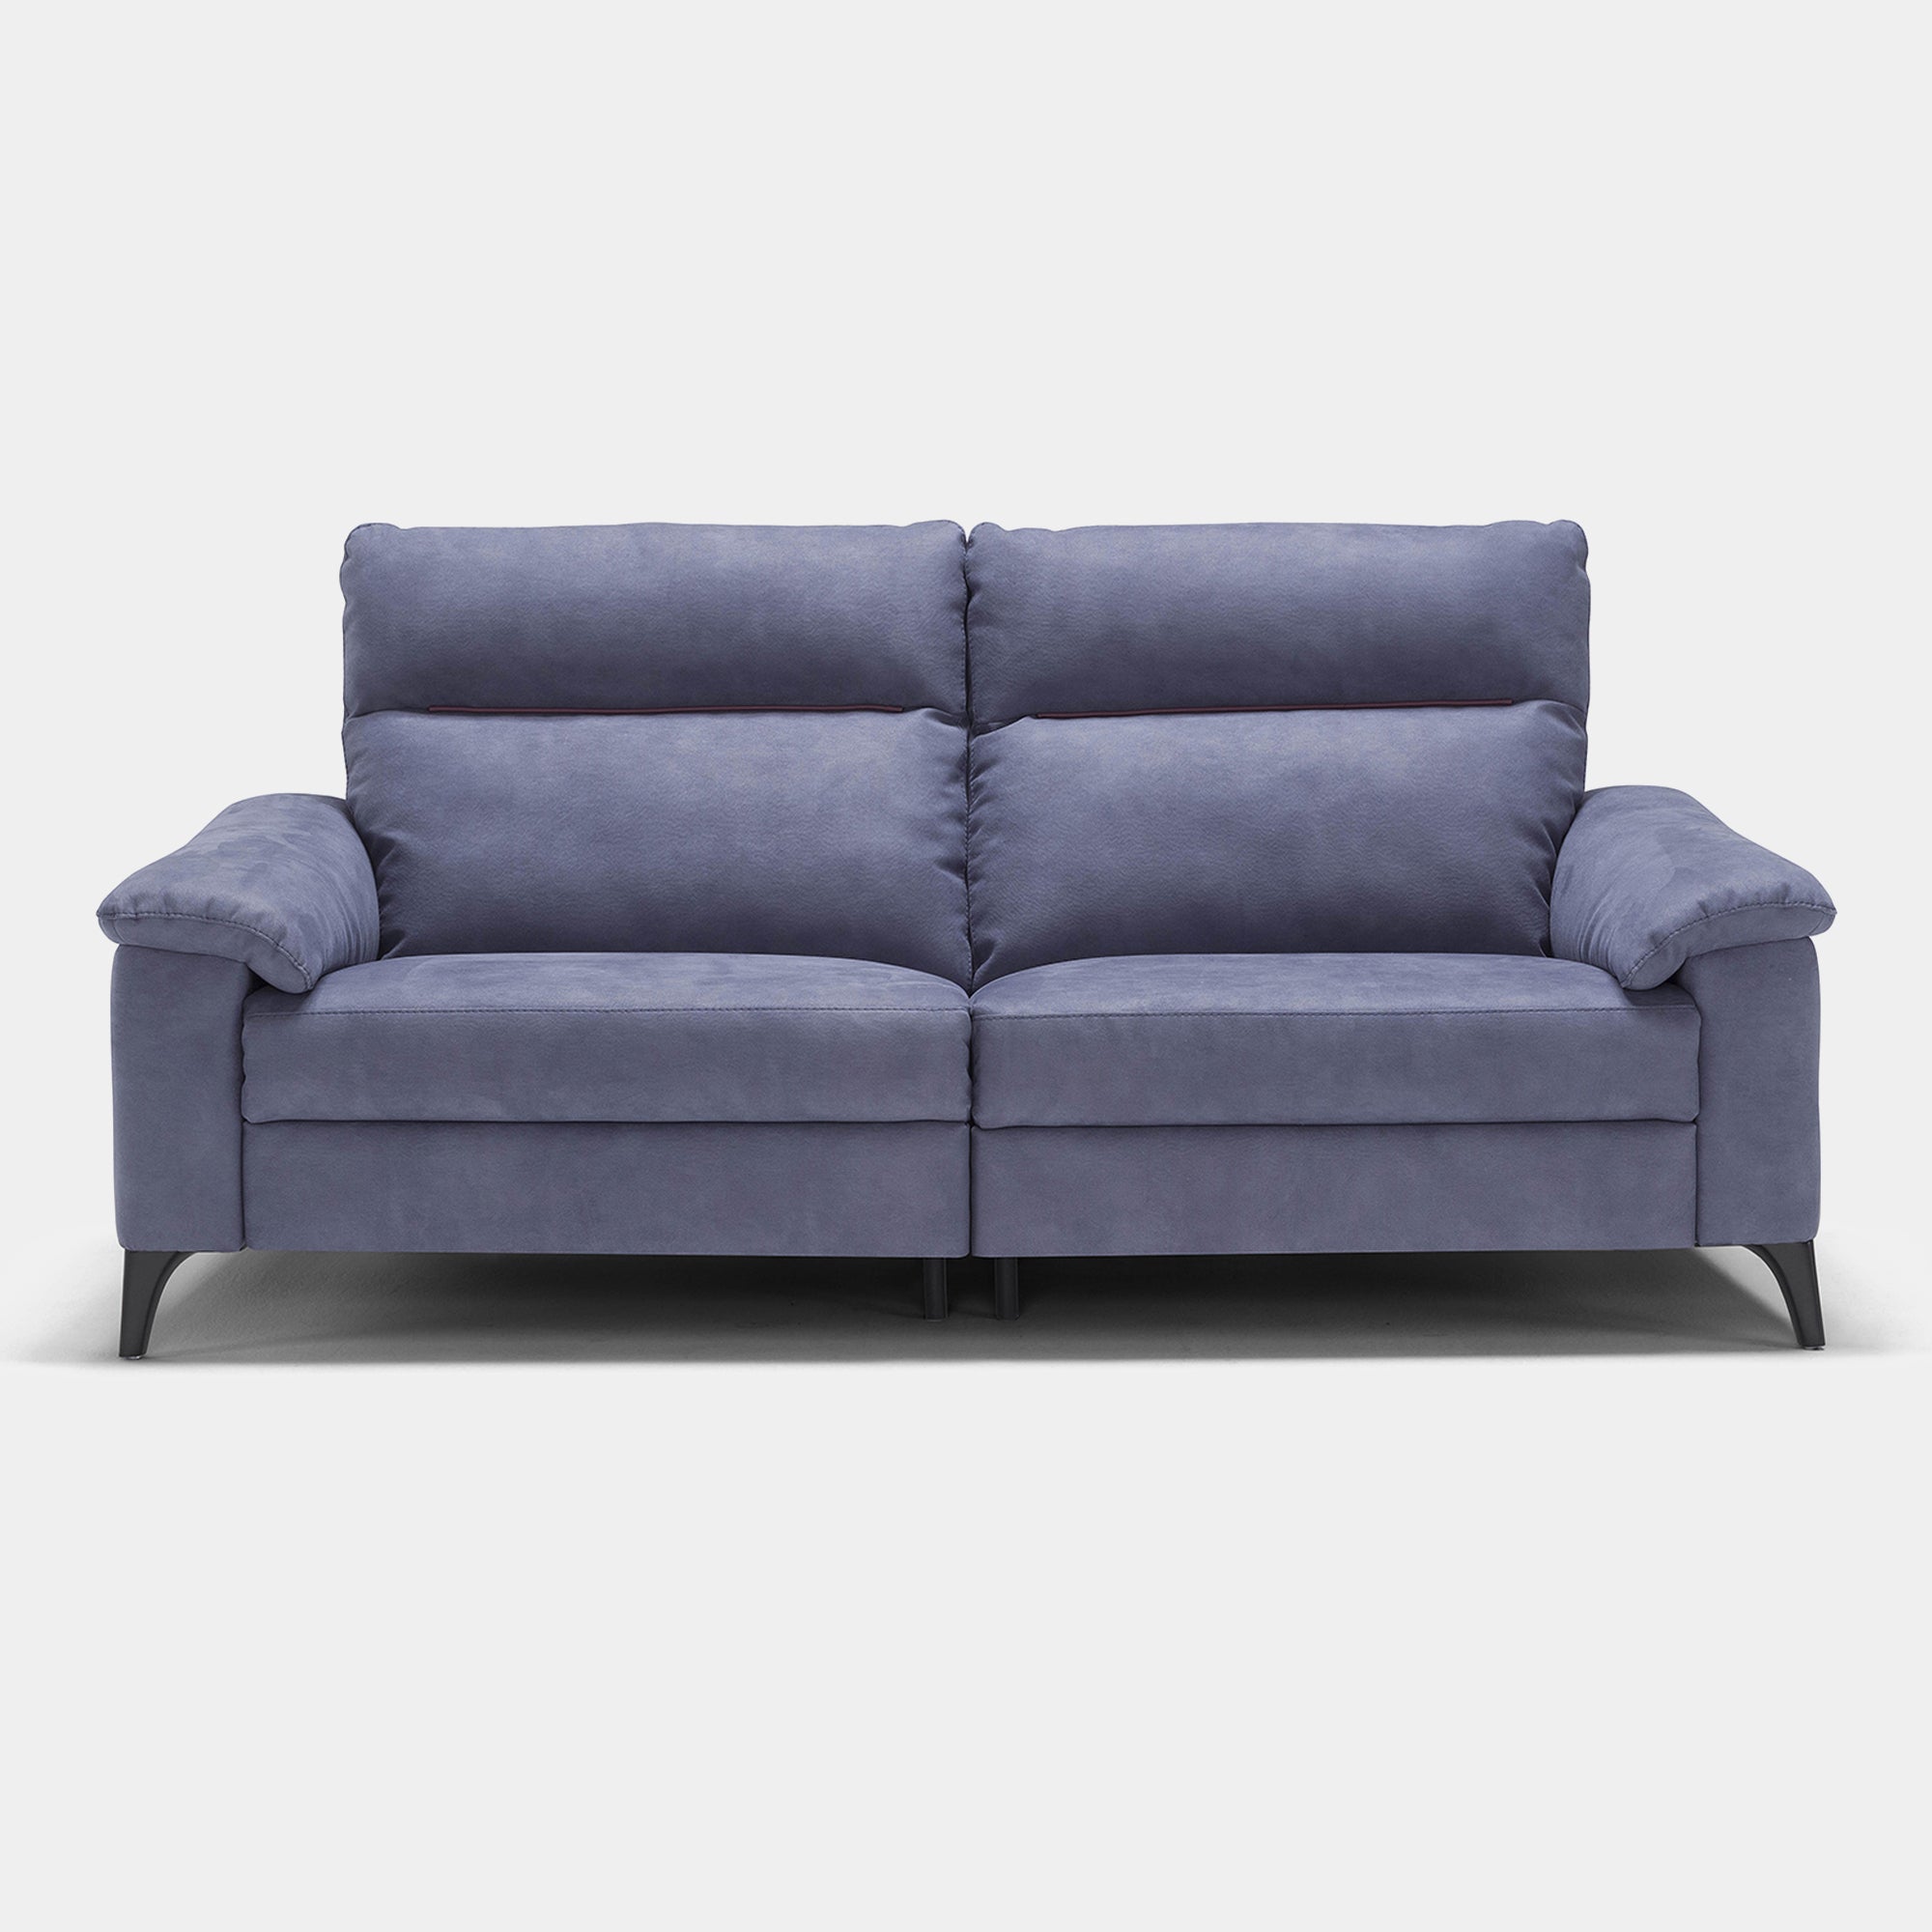 Treviso - 2 Seat Sofa In Fabric Or Leather Microfibre